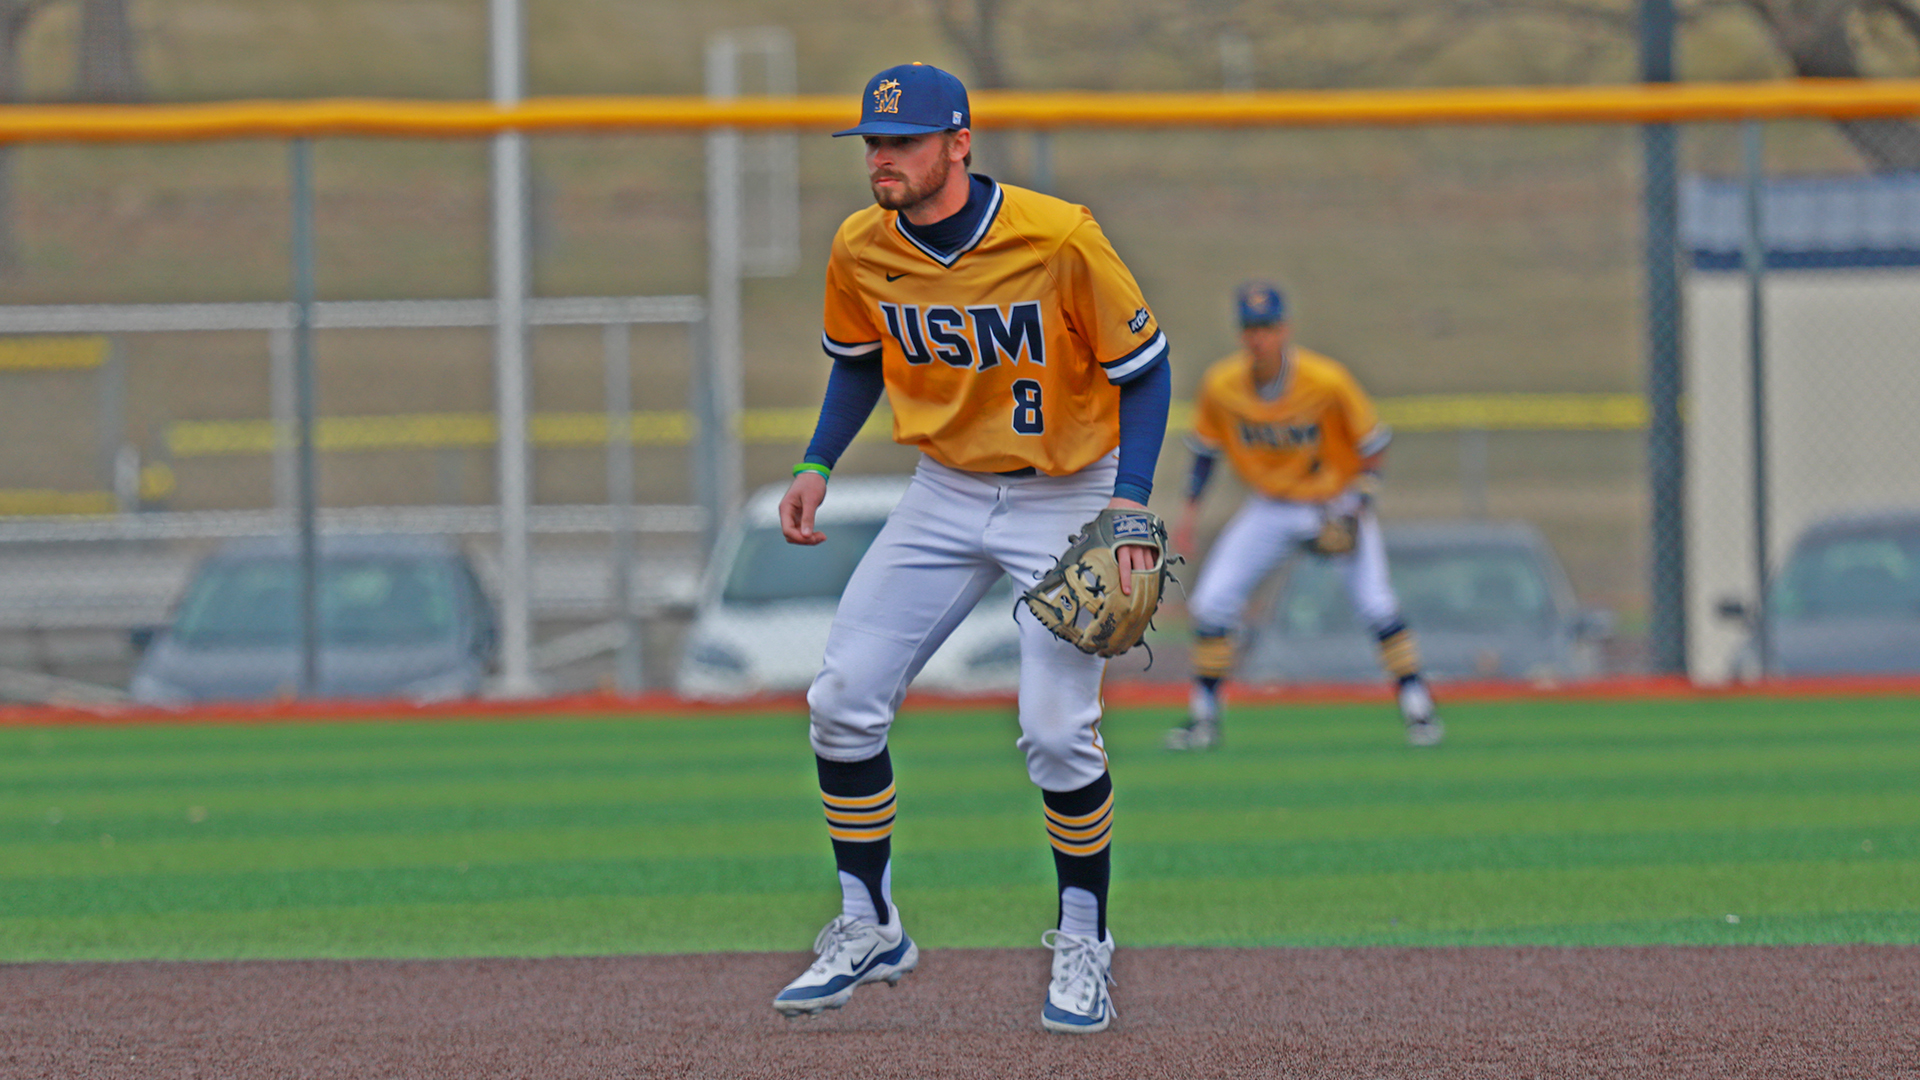 Spires fall to Tabor in Game Two of Their Mid-Week Series